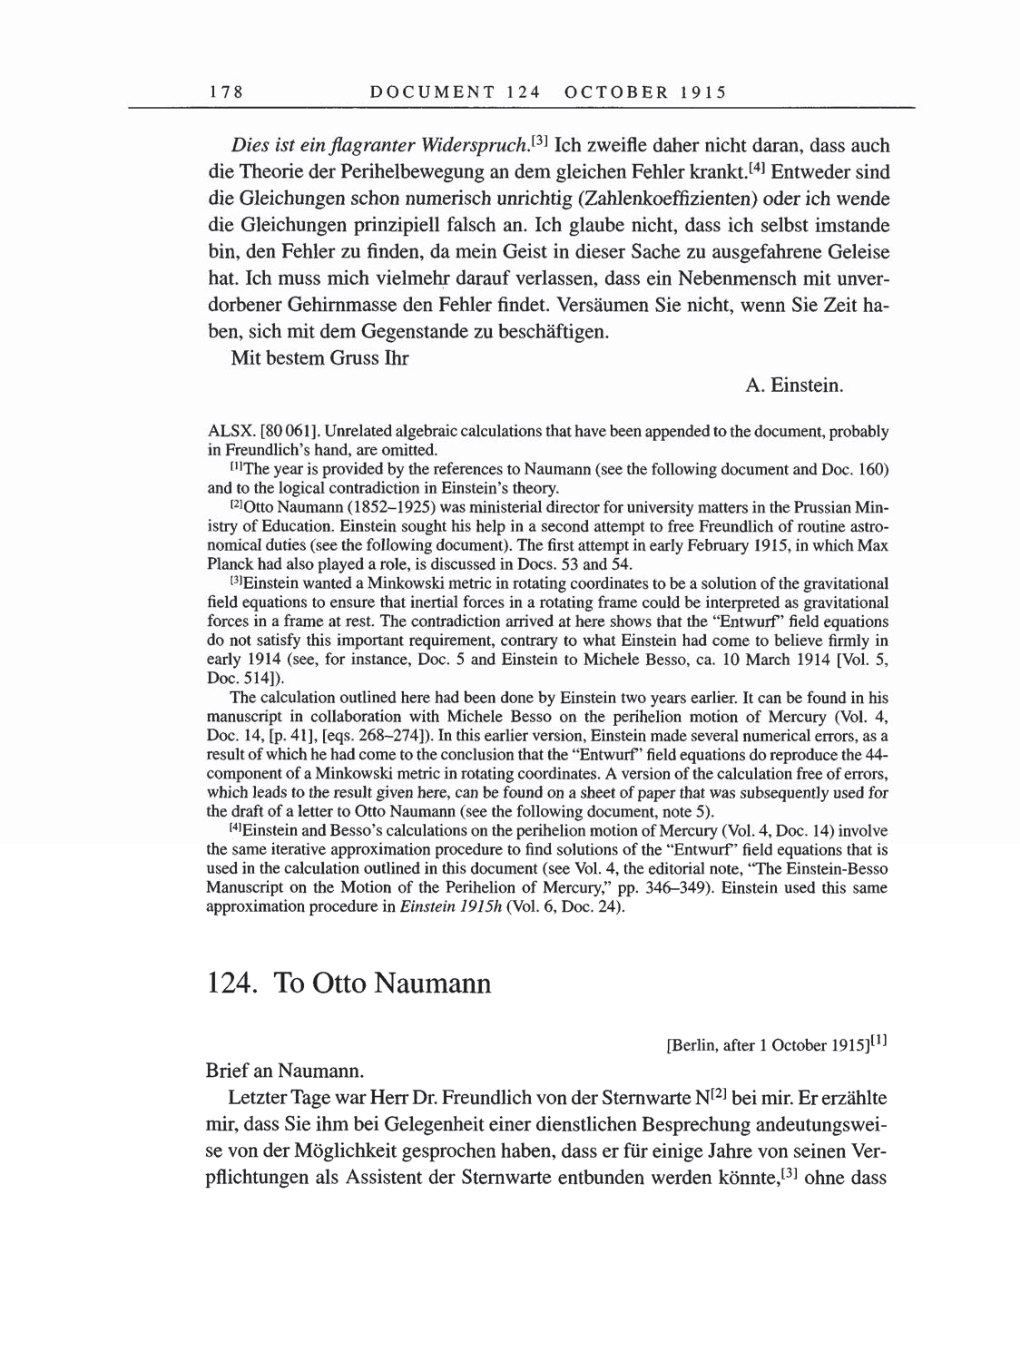 Volume 8, Part A: The Berlin Years: Correspondence 1914-1917 page 178